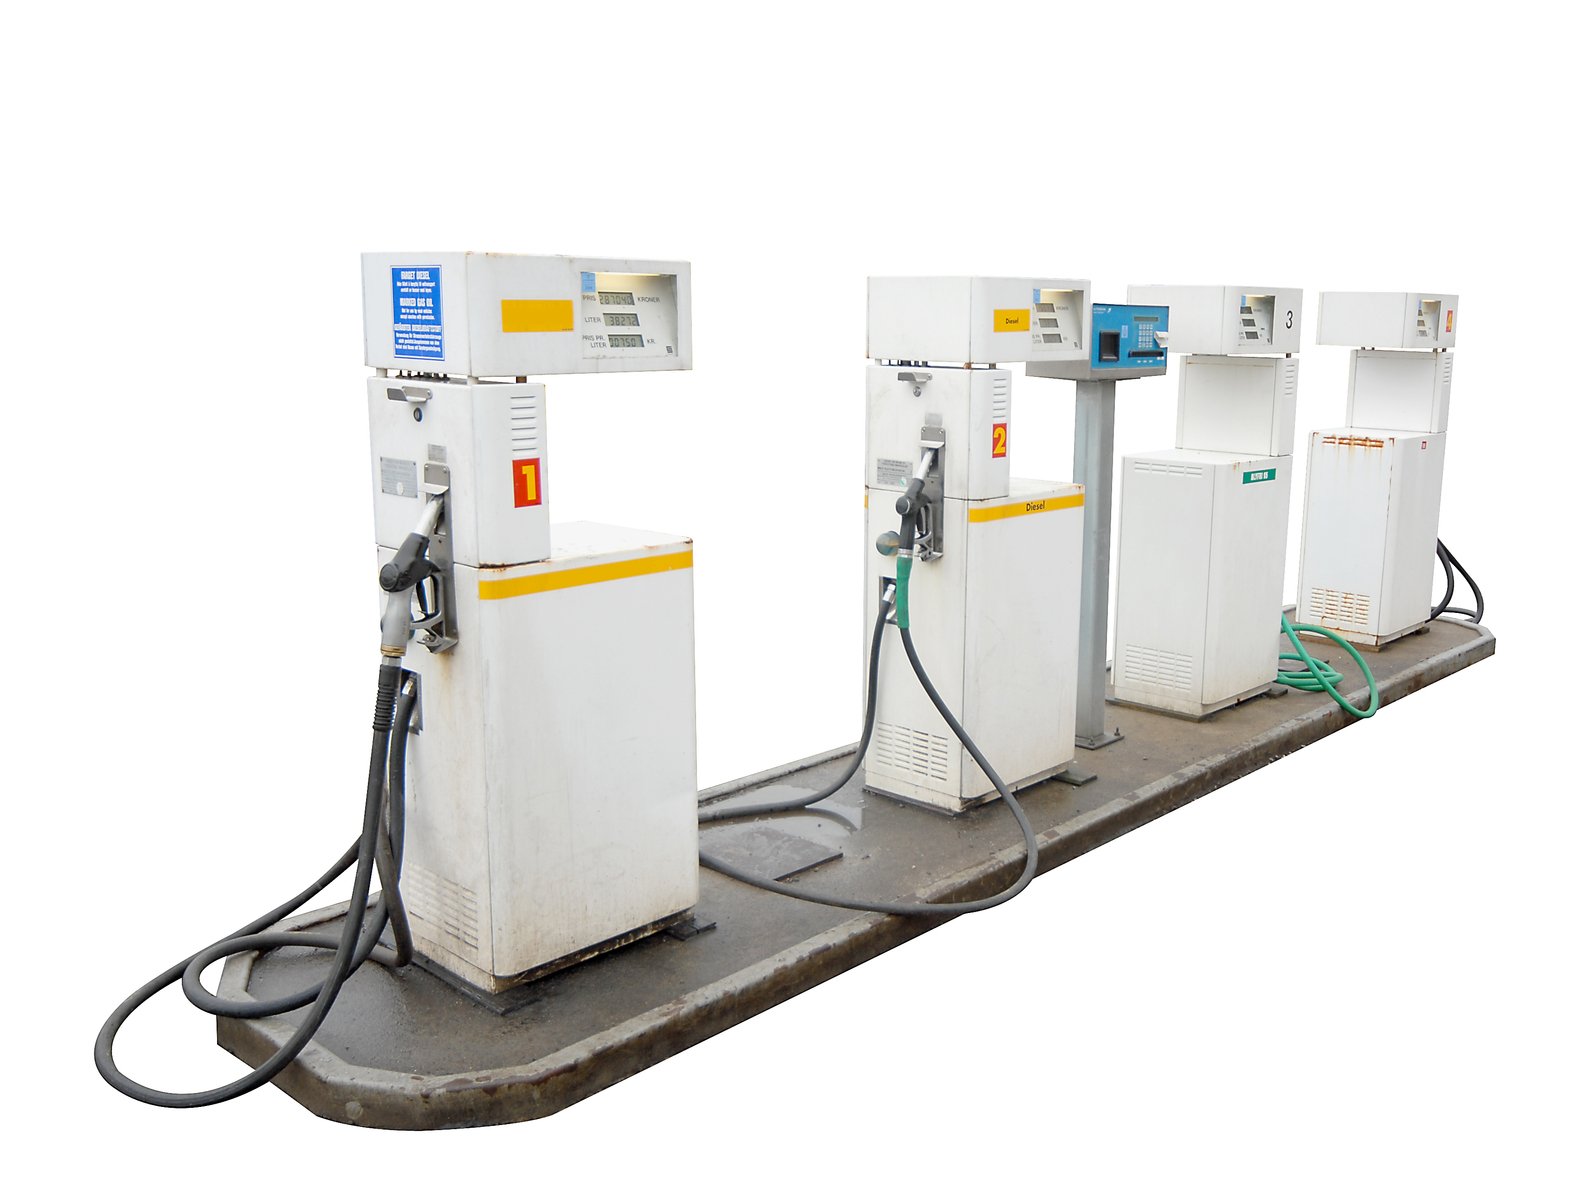 three gas pumps on display on a tray